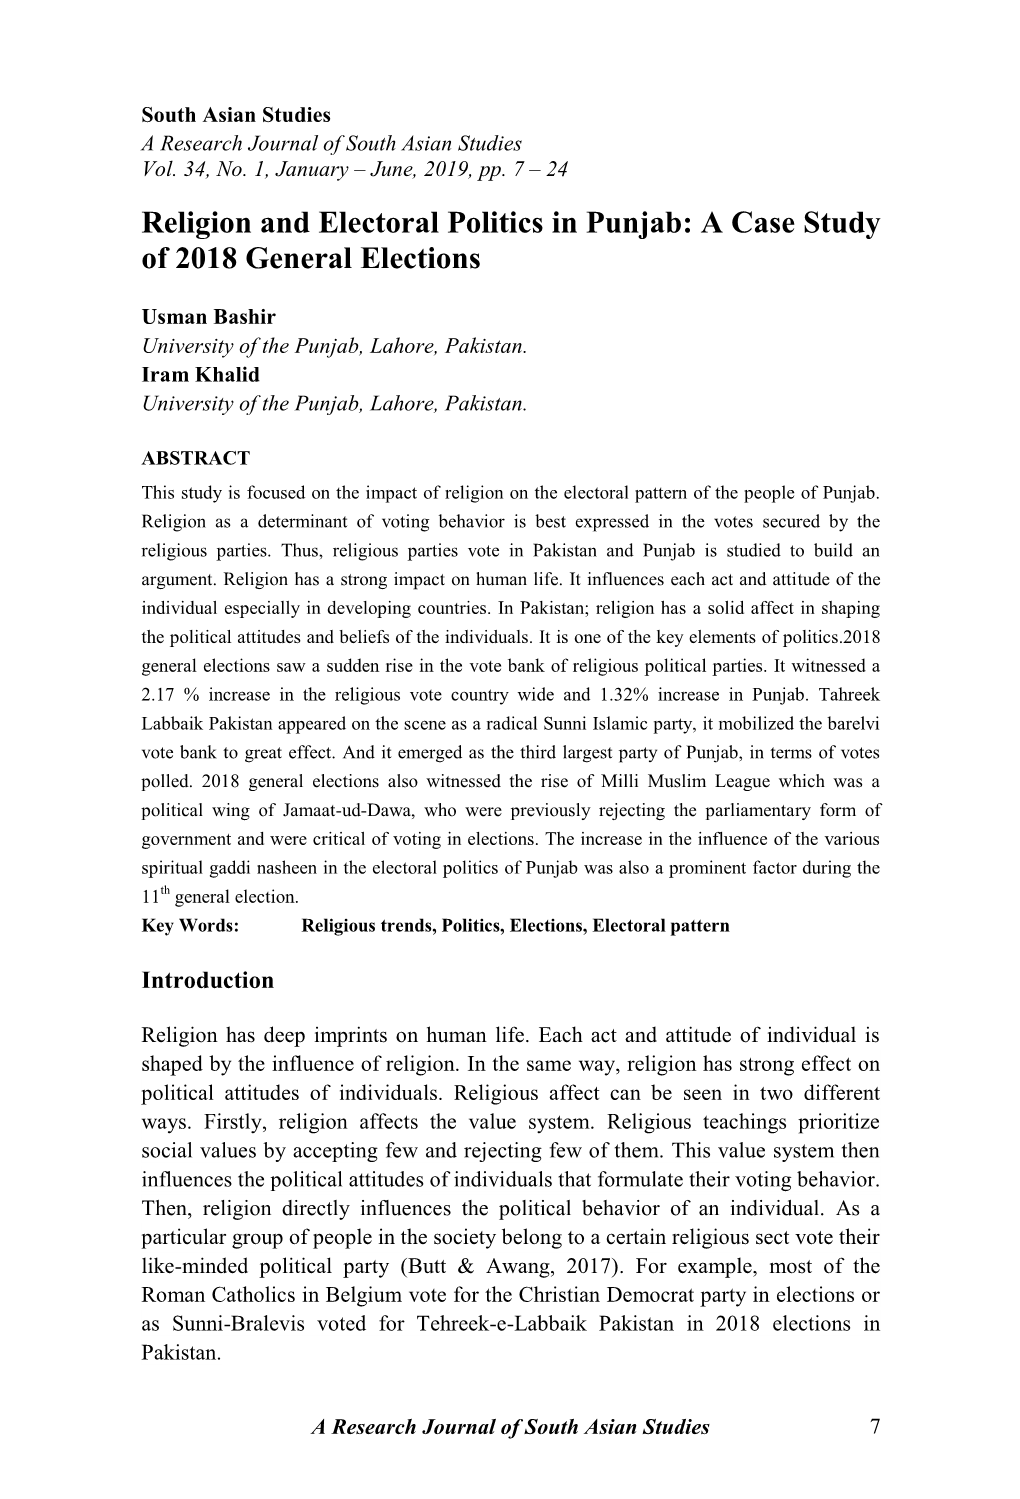 Religion and Electoral Politics in Punjab: a Case Study of 2018 General Elections